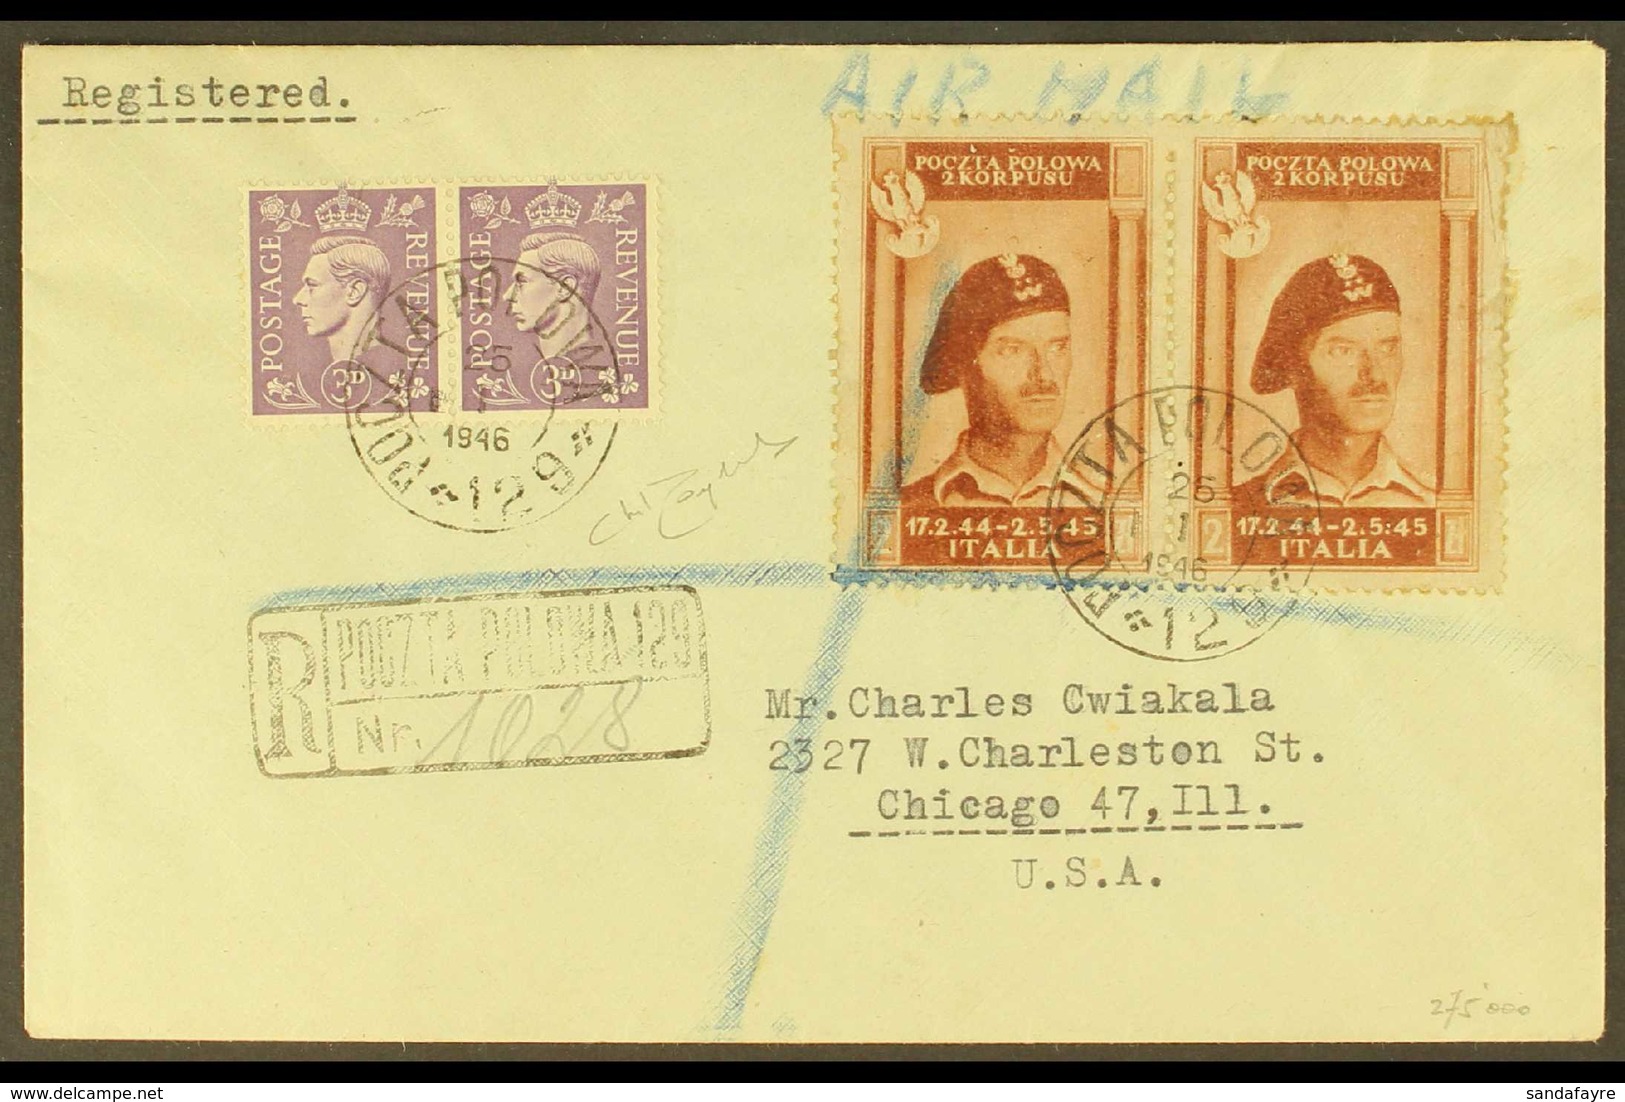 POLISH CORPS 1946 Registered Cover To Chicago Franked GB 3d Lilac Plus Polish Corps 2z Red Brown Pair, Sass 4, With Pozt - Sin Clasificación